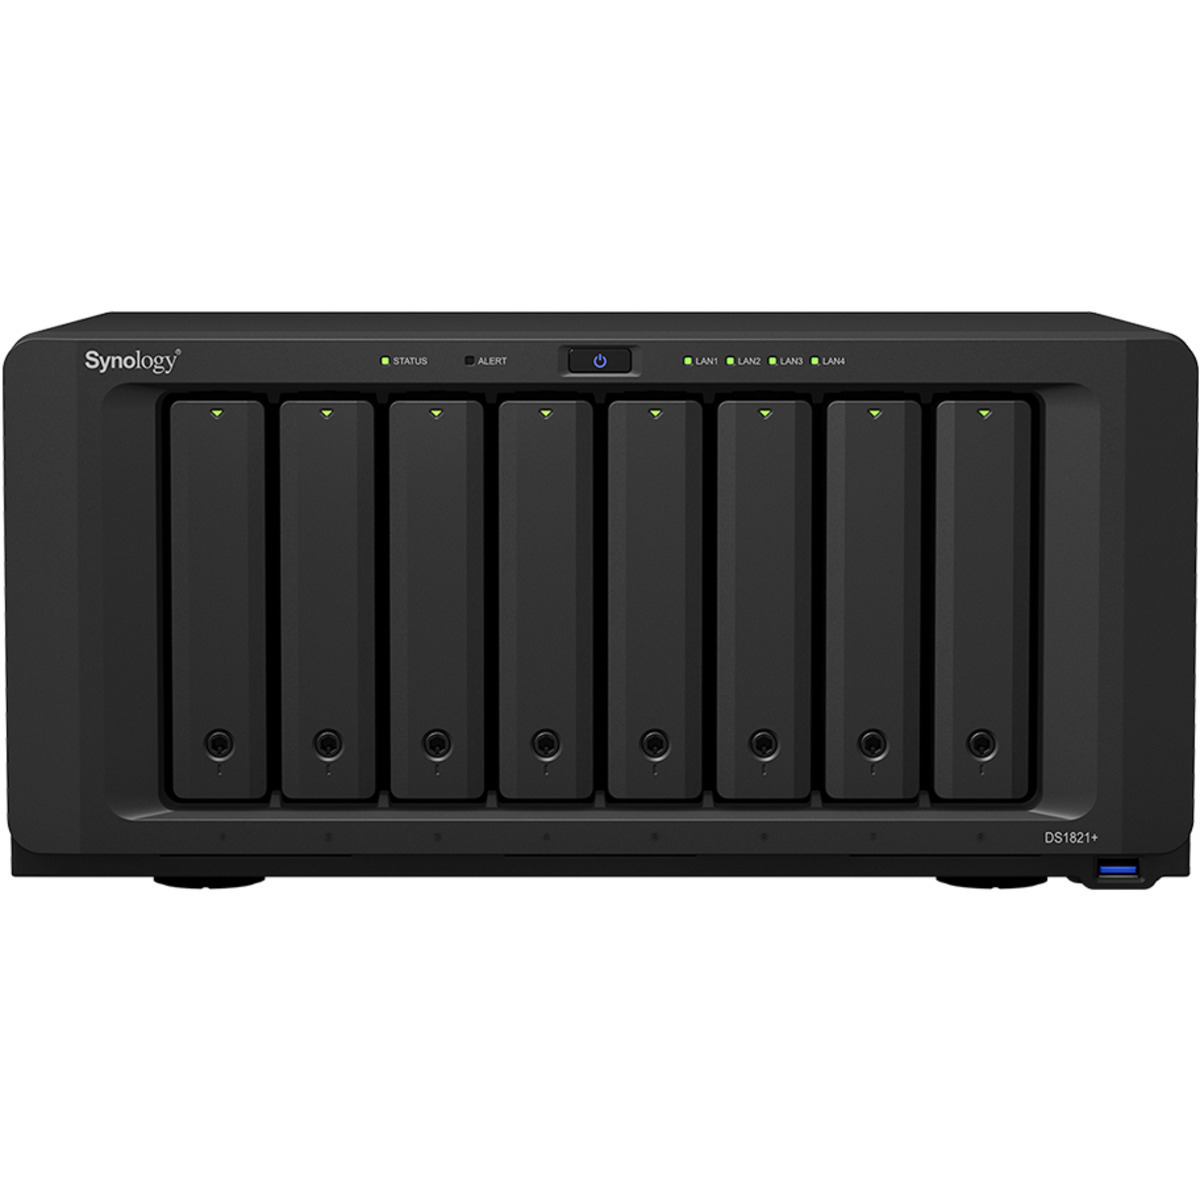 buy Synology DiskStation DS1821+ 128tb Desktop NAS - Network Attached Storage Device 8x16000gb Seagate IronWolf Pro ST16000NT001 3.5 7200rpm SATA 6Gb/s HDD NAS Class Drives Installed - Burn-In Tested - ON SALE - FREE RAM UPGRADE - nas headquarters buy network attached storage server device das new raid-5 free shipping simply usa christmas holiday black friday cyber monday week sale happening now! DiskStation DS1821+